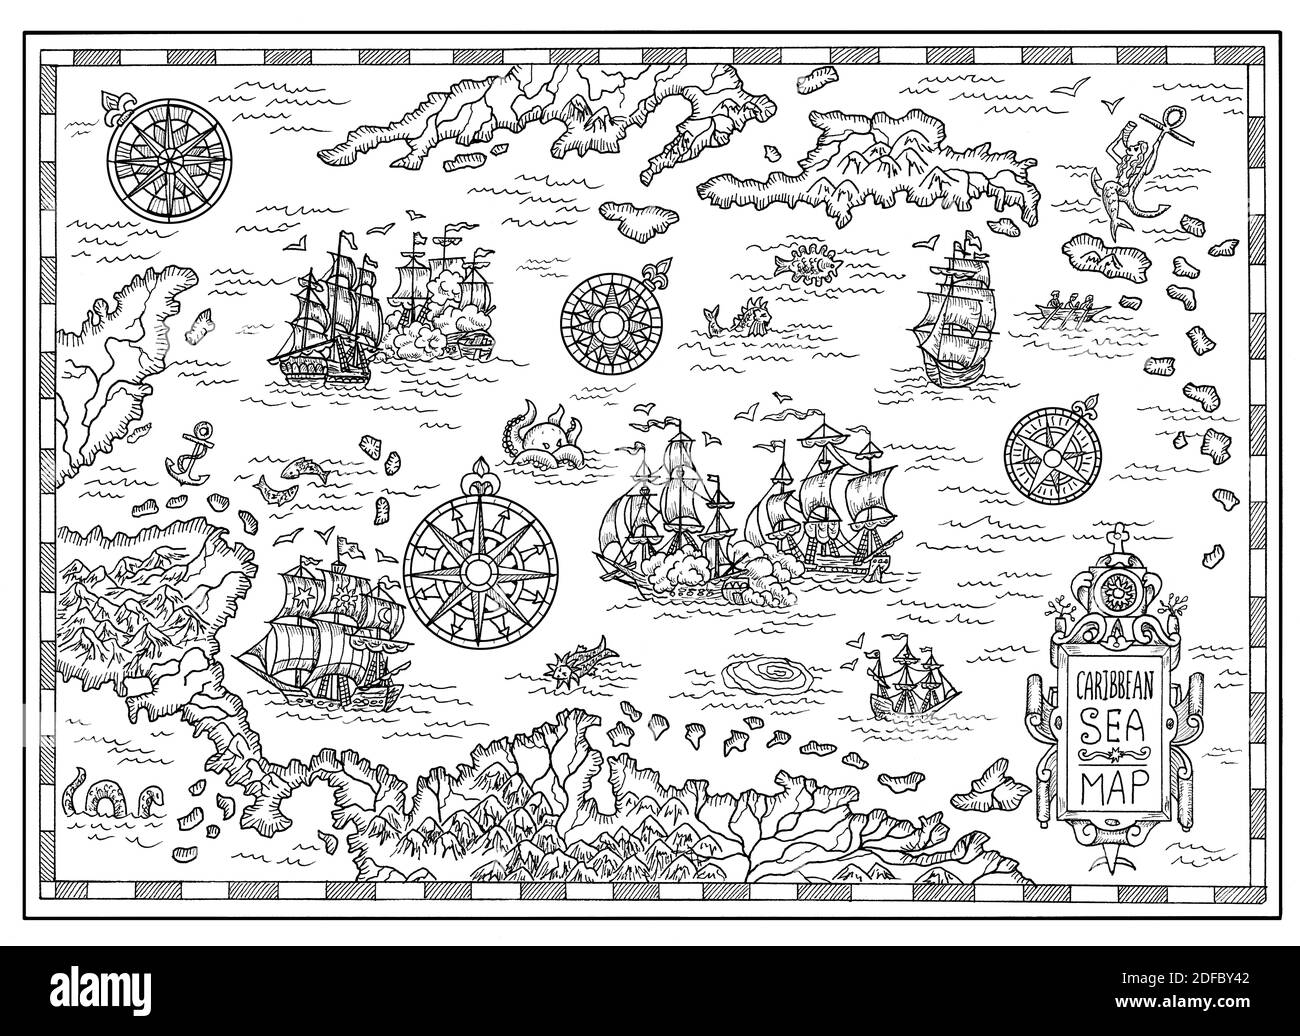 Ancient pirate map with old pirate sailboats, treasure islands. Decorative antique background with nautical chart, adventure treasures hunt concept Stock Photo